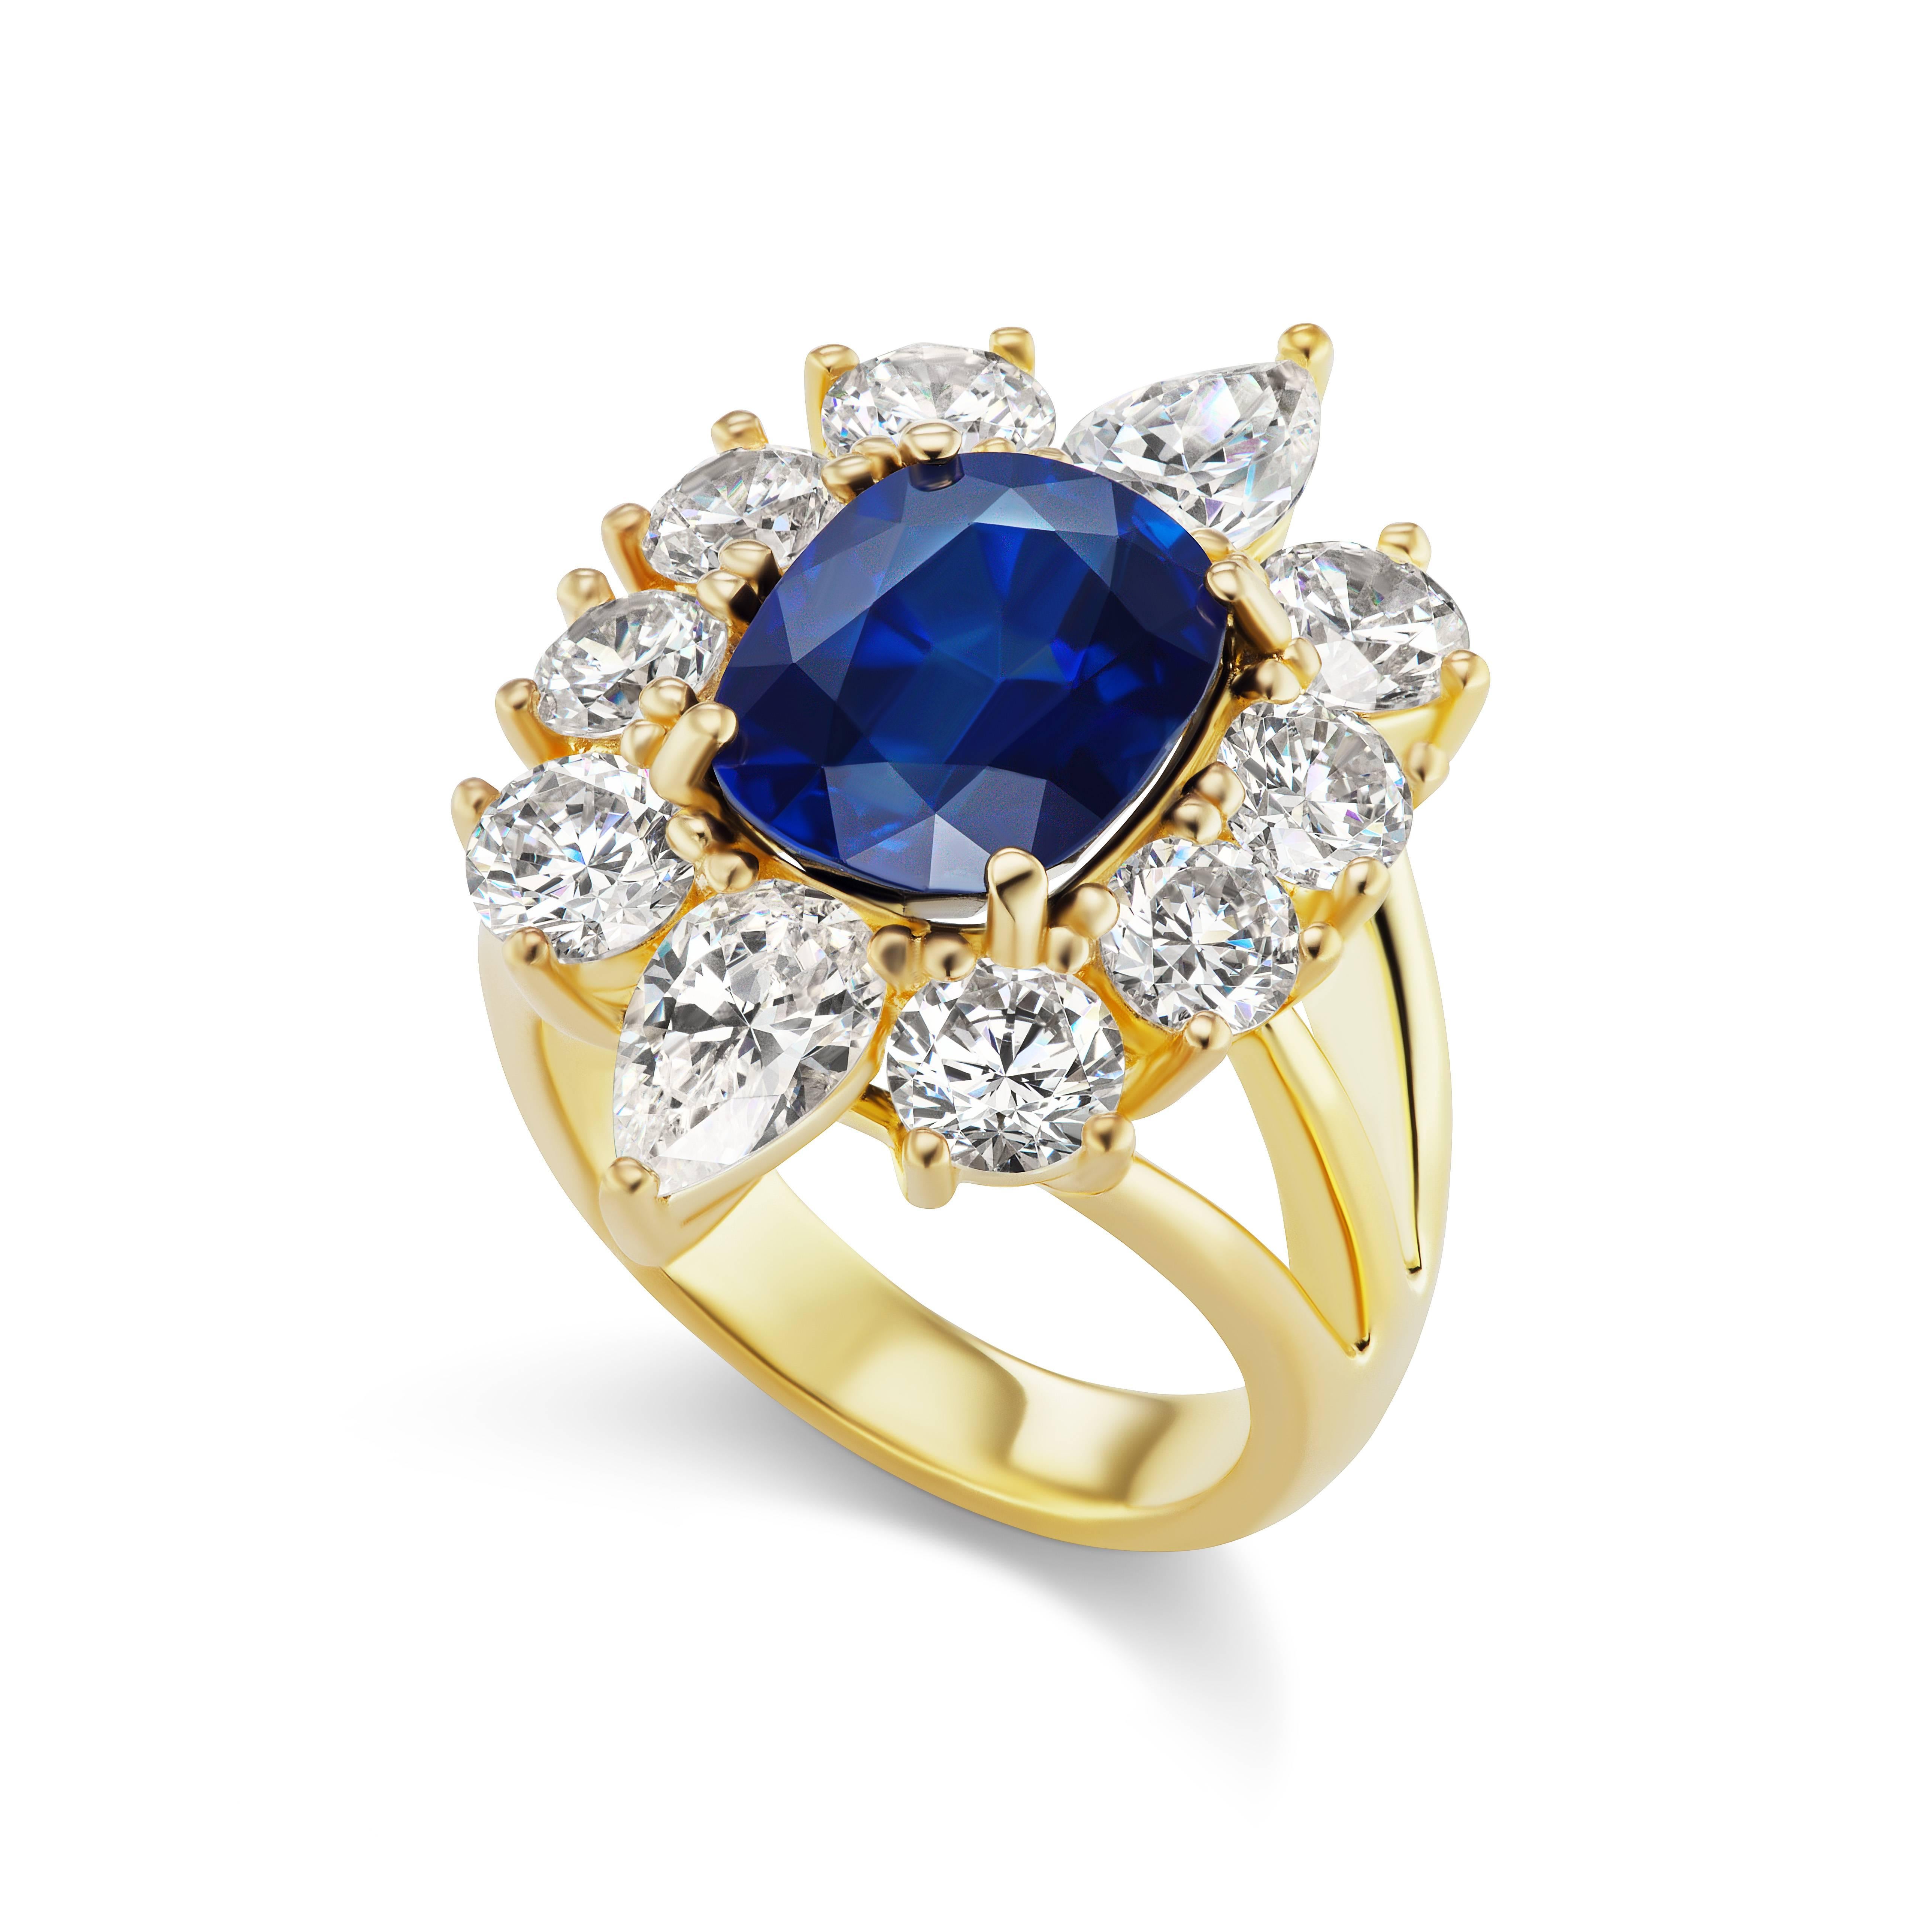 Magnificent  Costume Jewelry Classic Man Made Burma Sapphire CZ Diamond  Halo Cluster Vermeil Ring Set With Round And Pear Shape CZ Centering A Man Made Burma 5 Carat Sapphire . Measures 3/4'' by 1''.   Can be sized by your own jeweler.